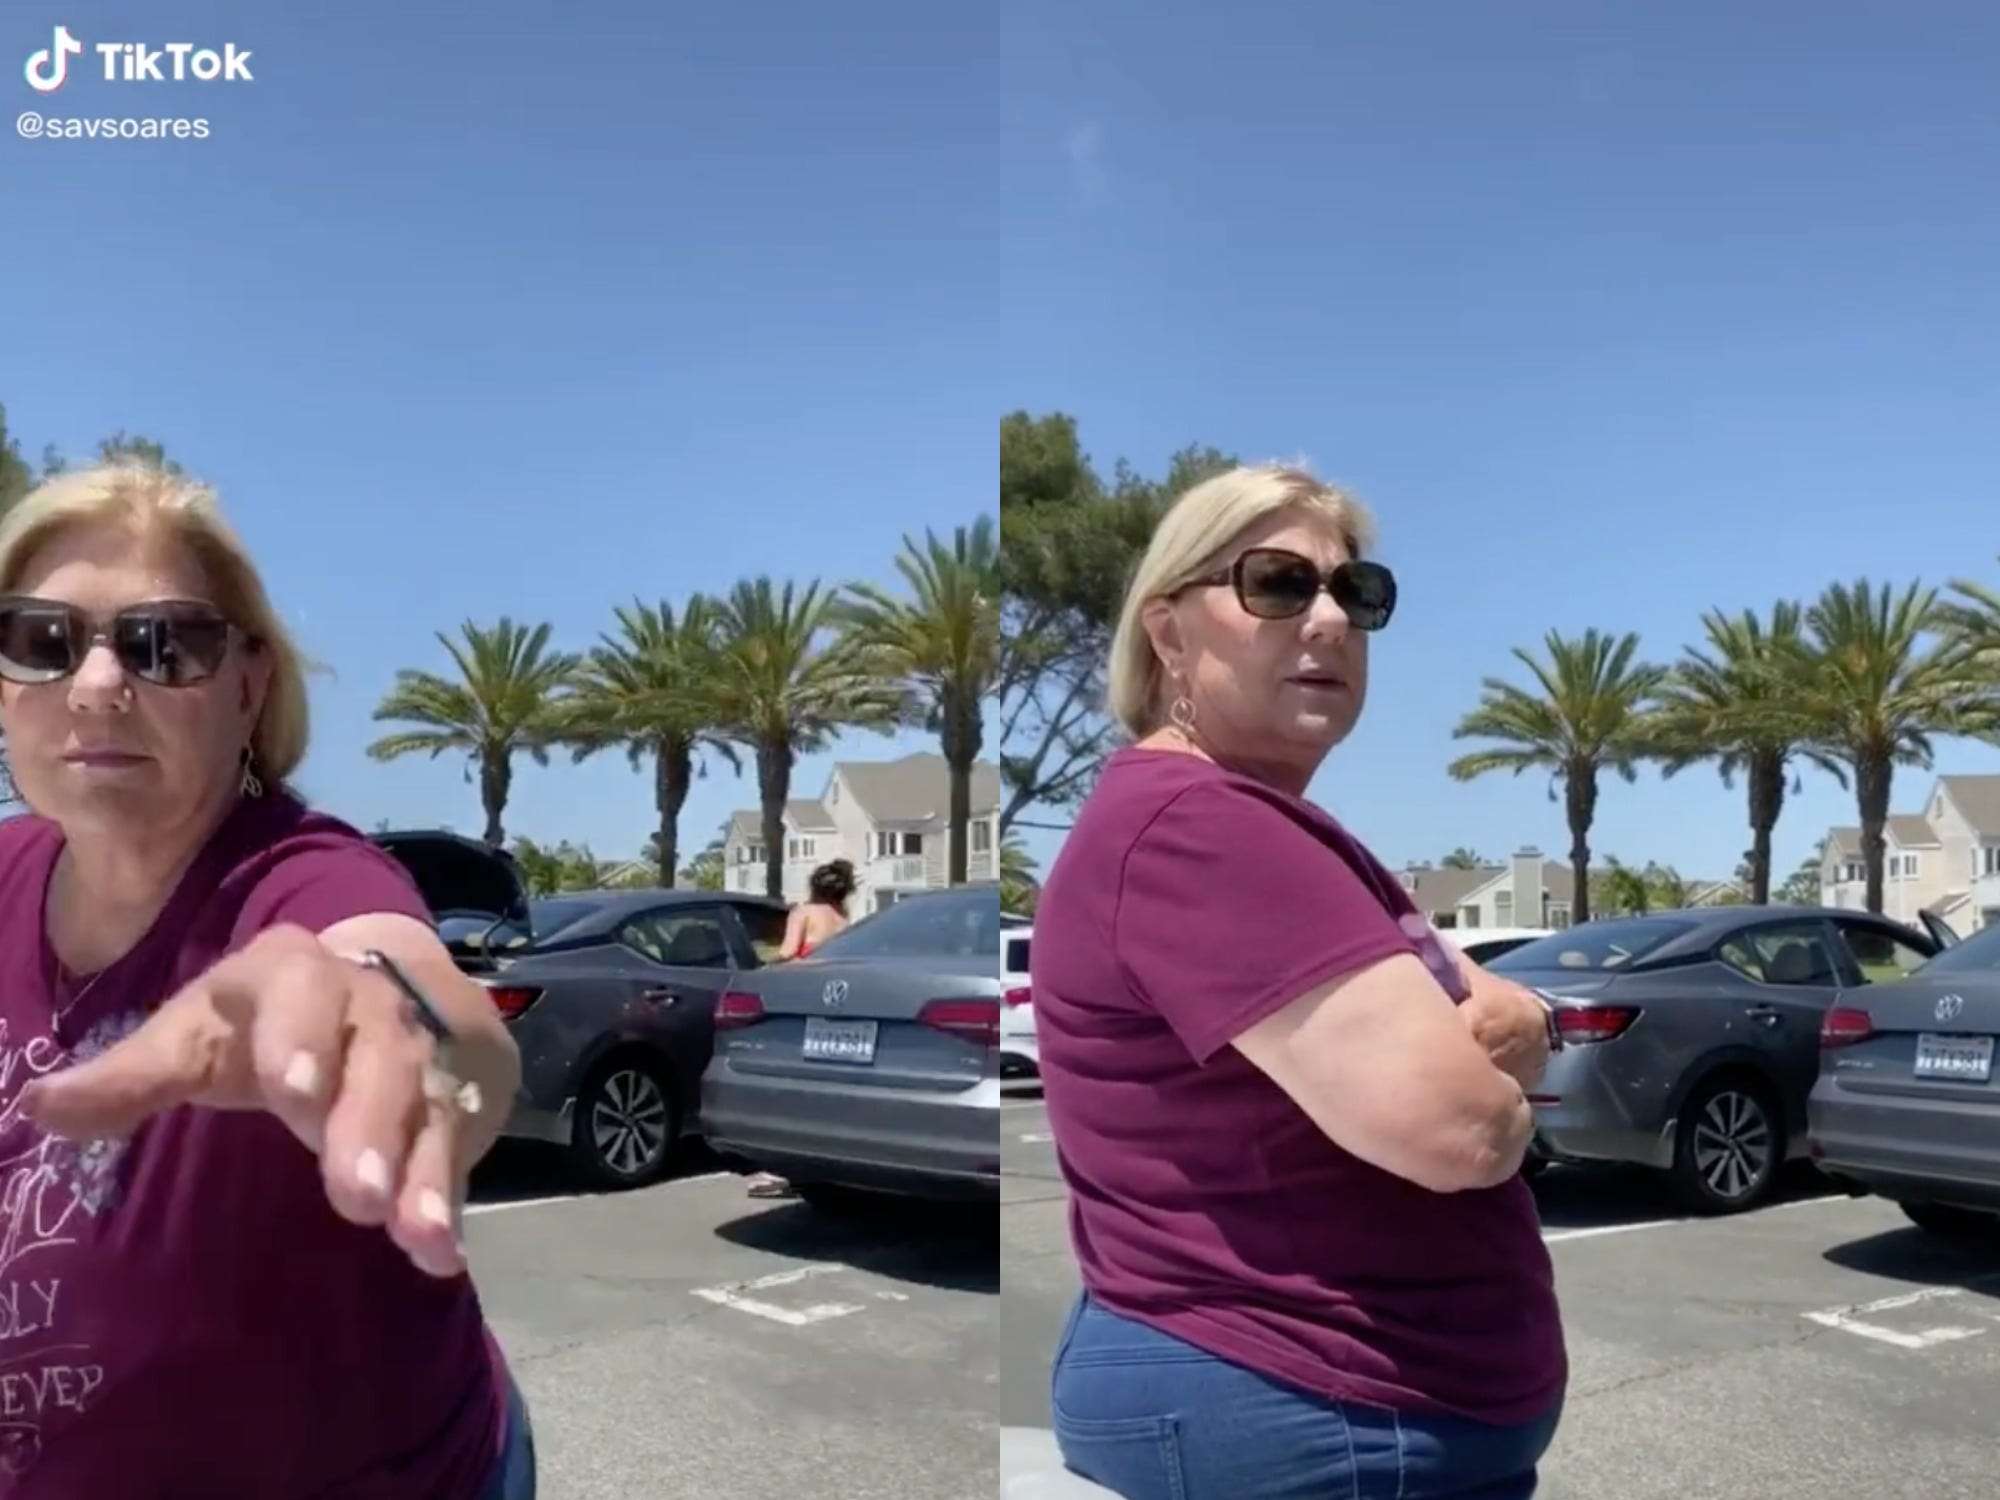 A New Parking Lot Karen Is Going Viral On Tiktok For Physically Blocking Someones Car From An 